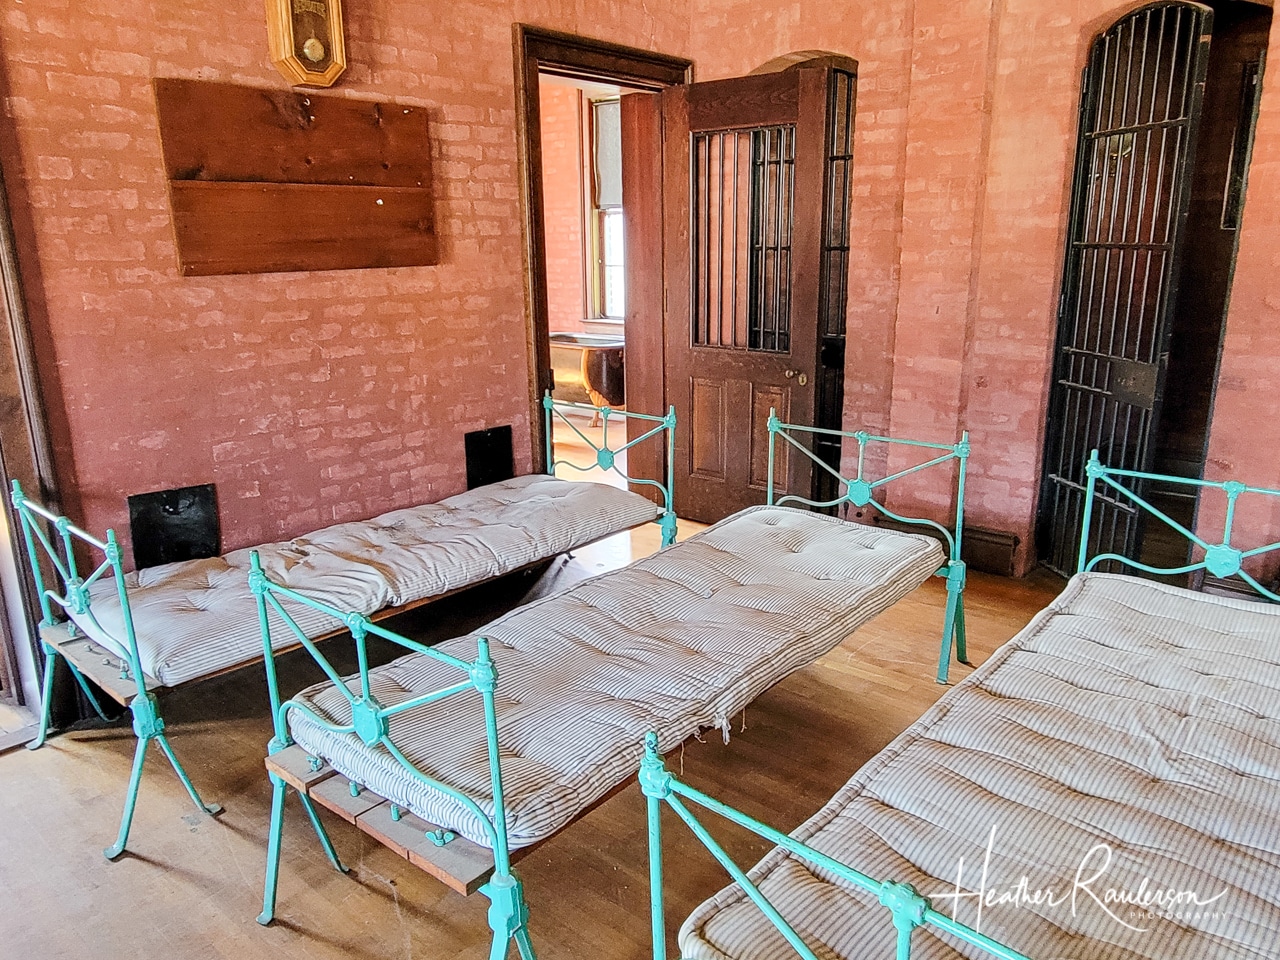 Soldiers beds at the jail in Fort Wayne